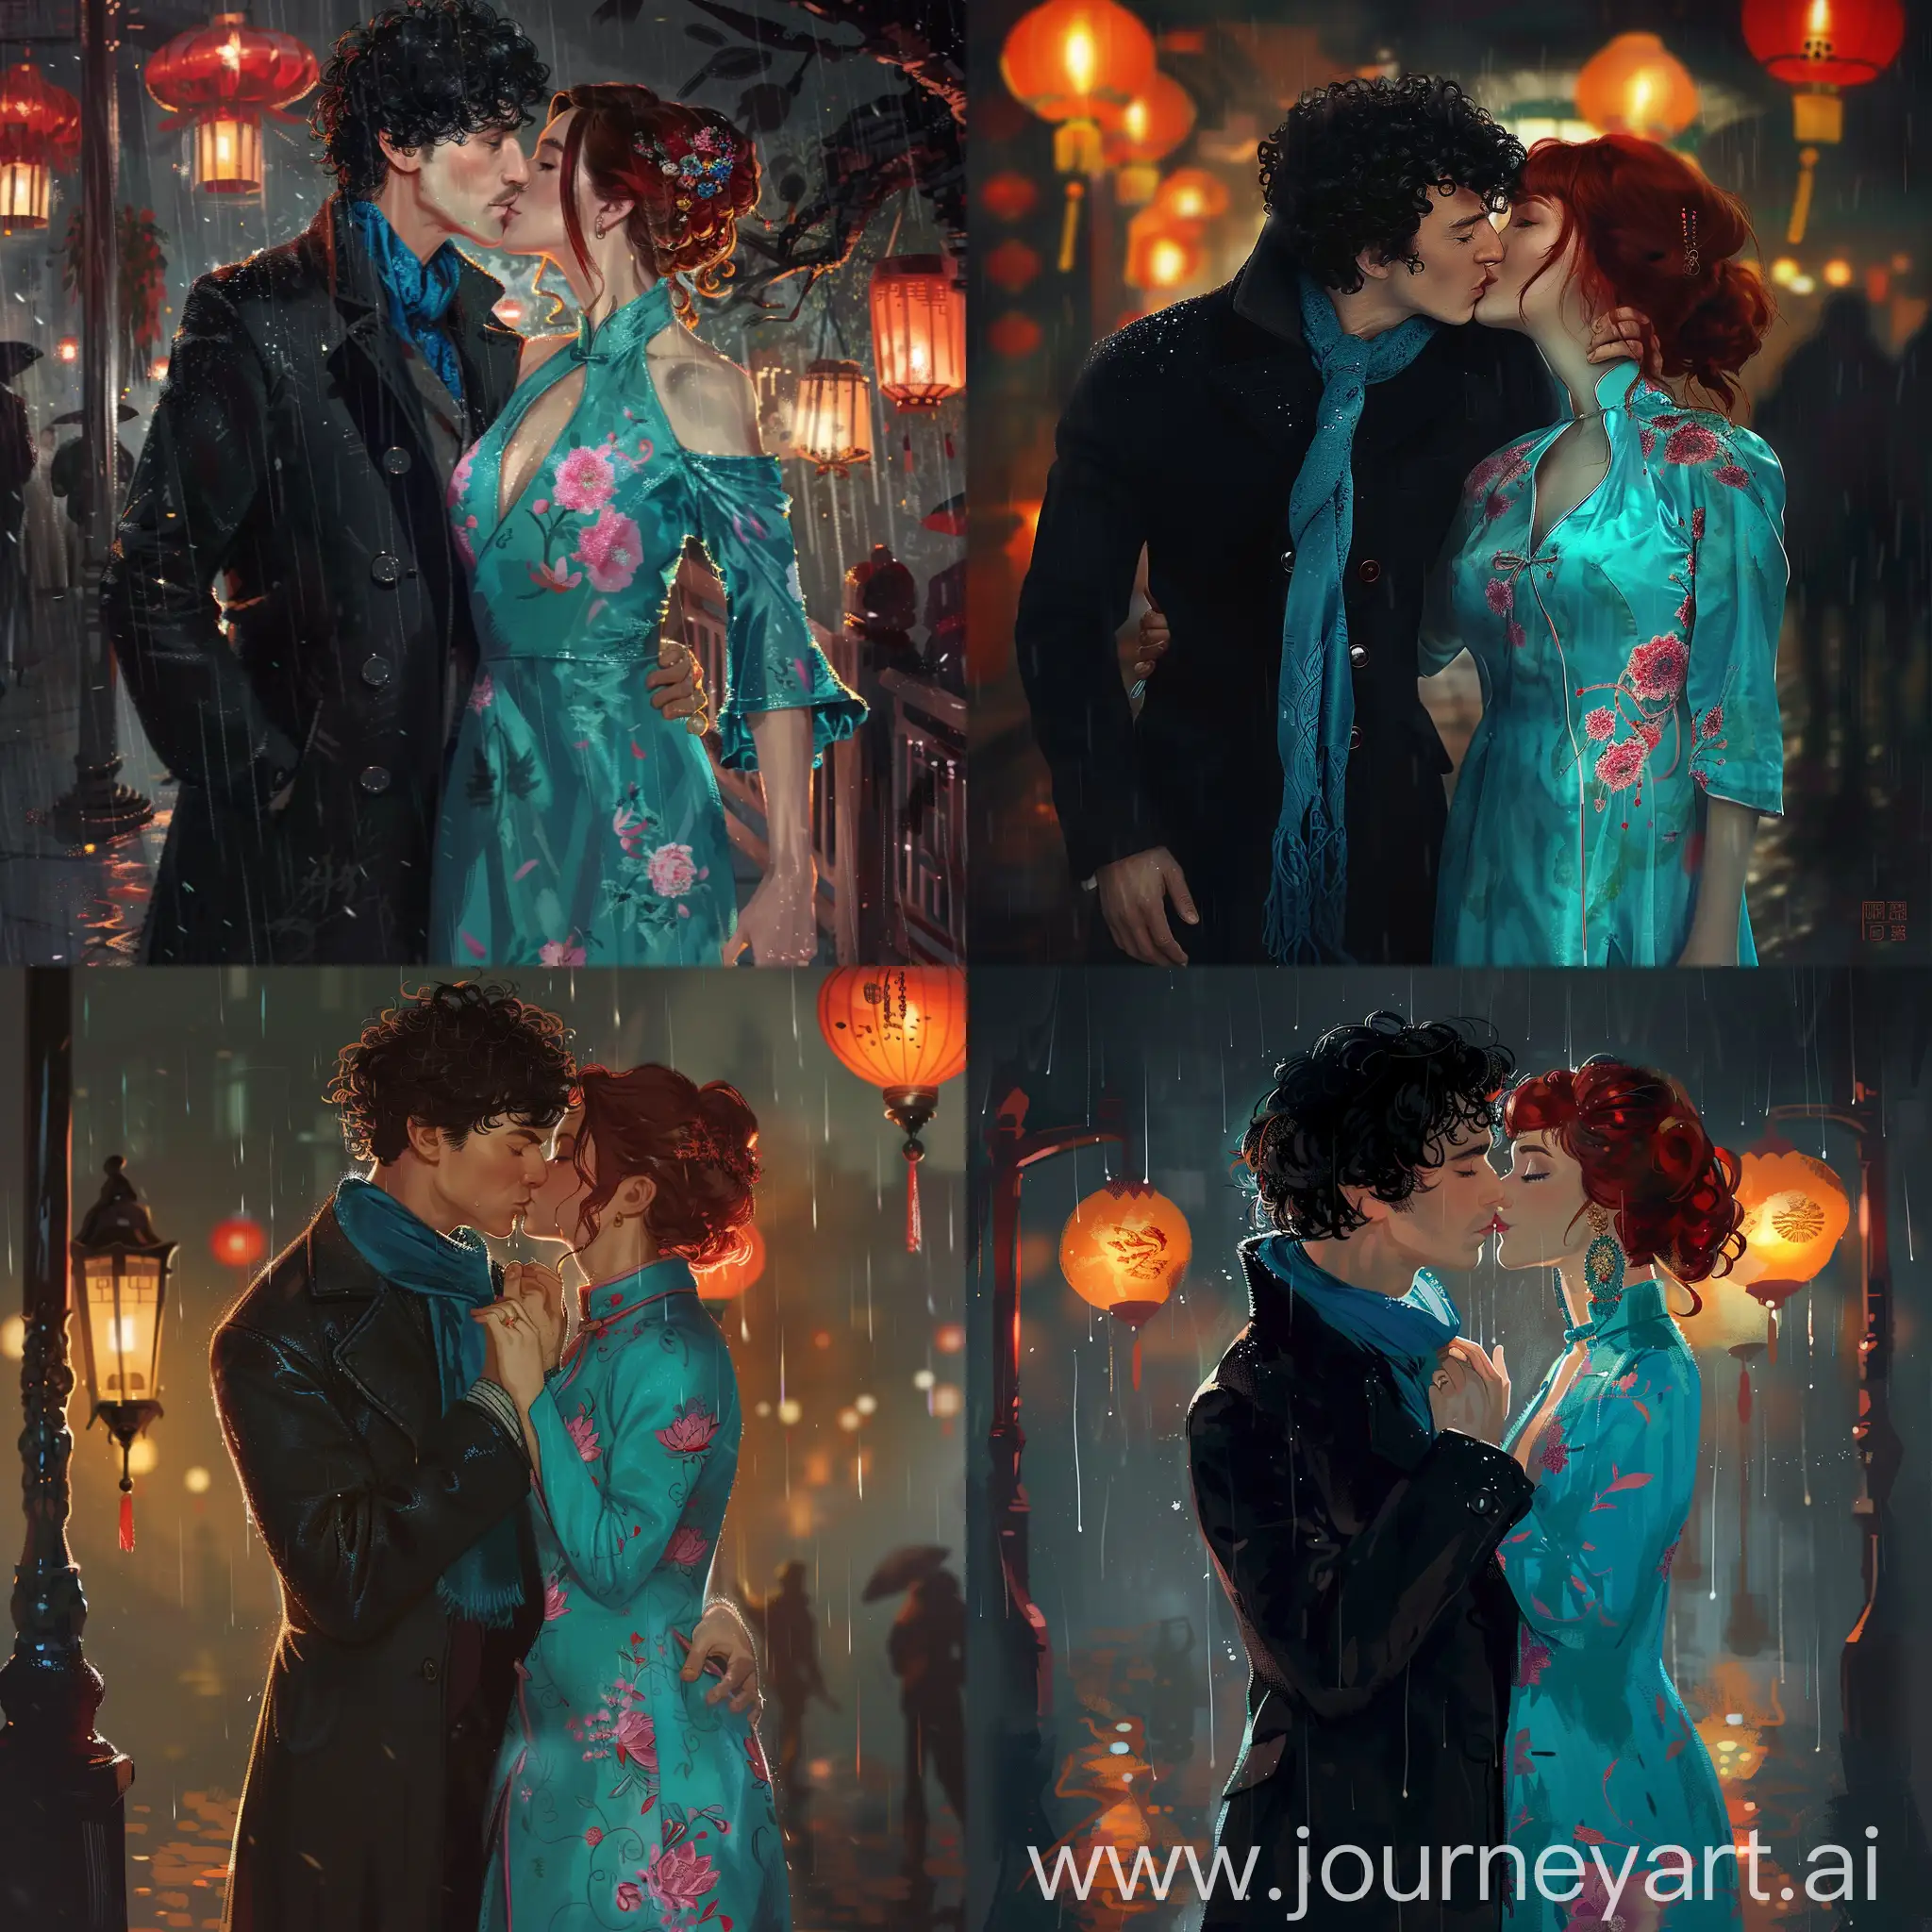 Sherlock Holmes with black curly hair from the BBC series Sherlock in a felt black coat and a blue scarf kisses a red-haired woman in a turquoise qipao with a pink floral pattern. The couple stands in the night rain and are illuminated only by lanterns